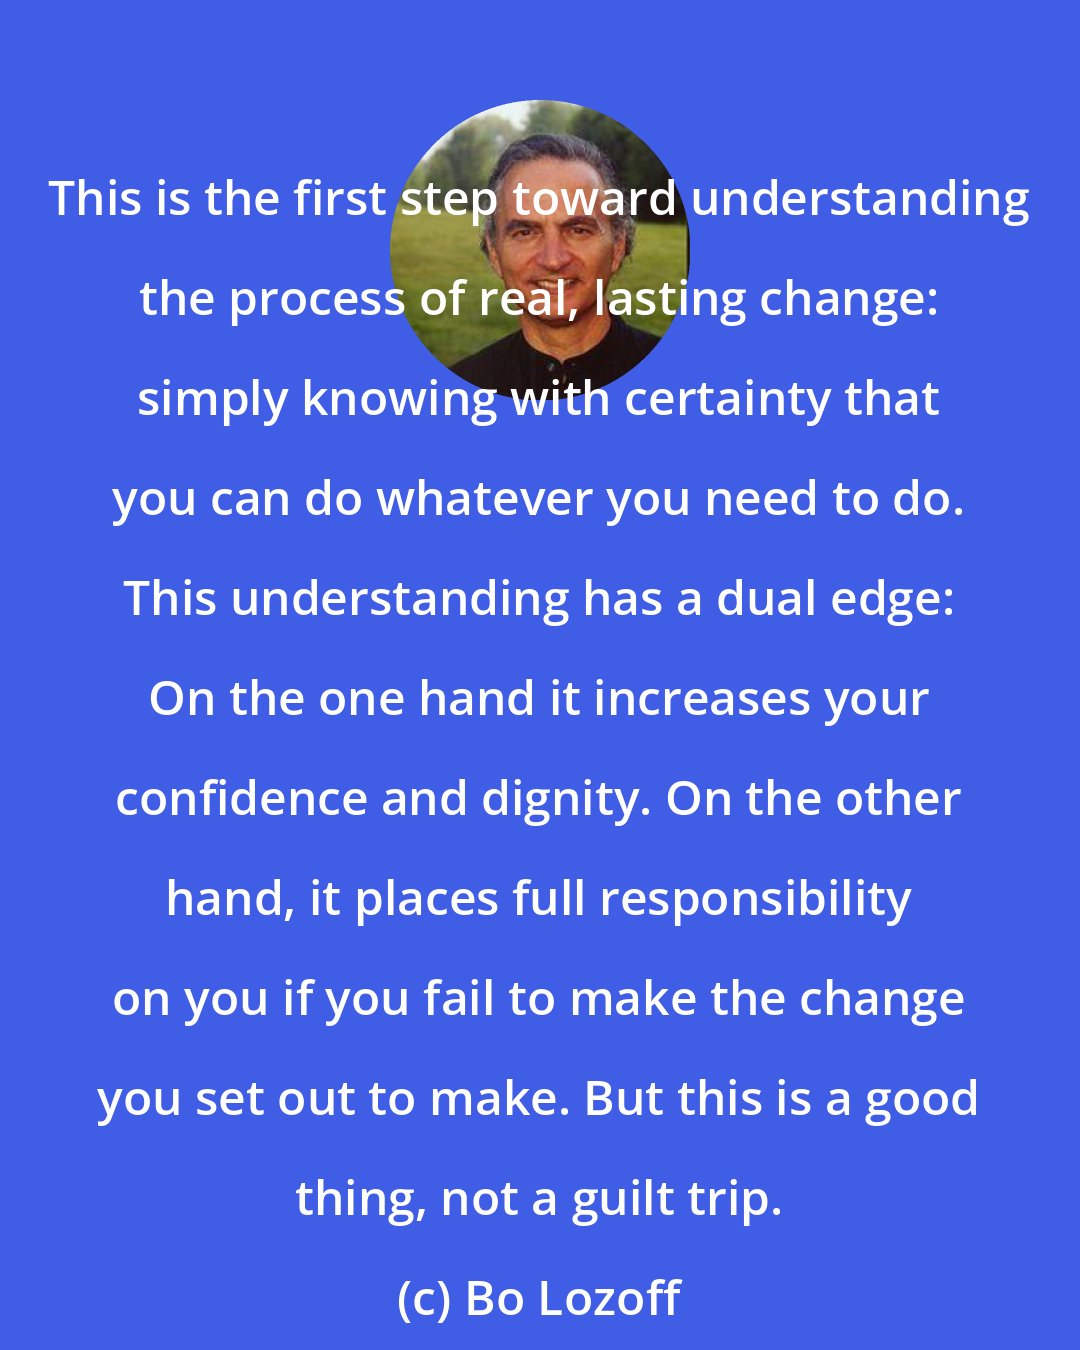 Bo Lozoff: This is the first step toward understanding the process of real, lasting change: simply knowing with certainty that you can do whatever you need to do. This understanding has a dual edge: On the one hand it increases your confidence and dignity. On the other hand, it places full responsibility on you if you fail to make the change you set out to make. But this is a good thing, not a guilt trip.